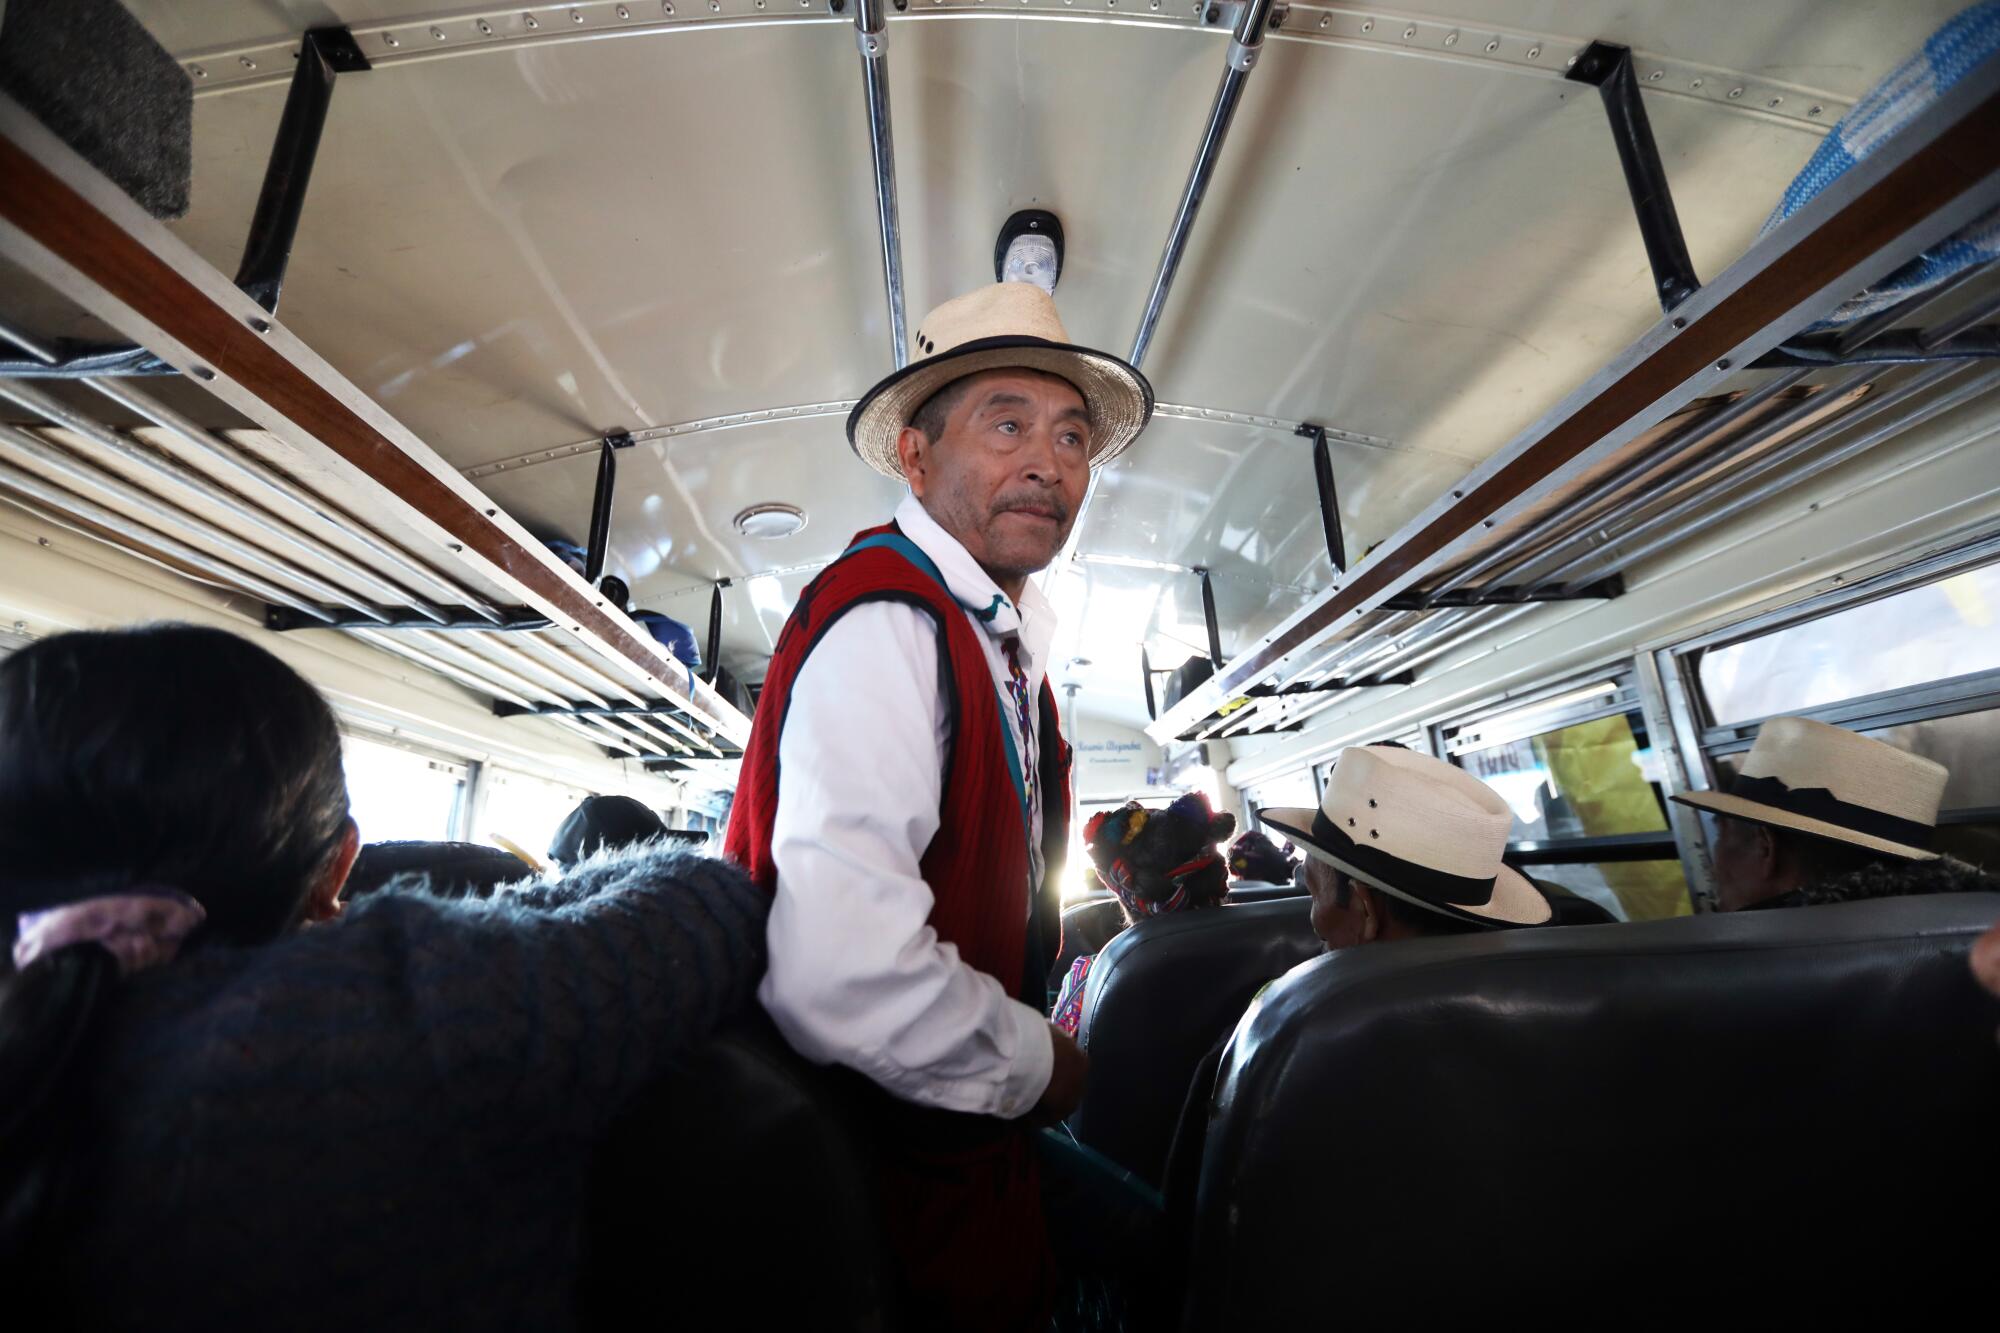 A man in a hat, white long-sleeved shirt and red vest stands near passengers in a bus 